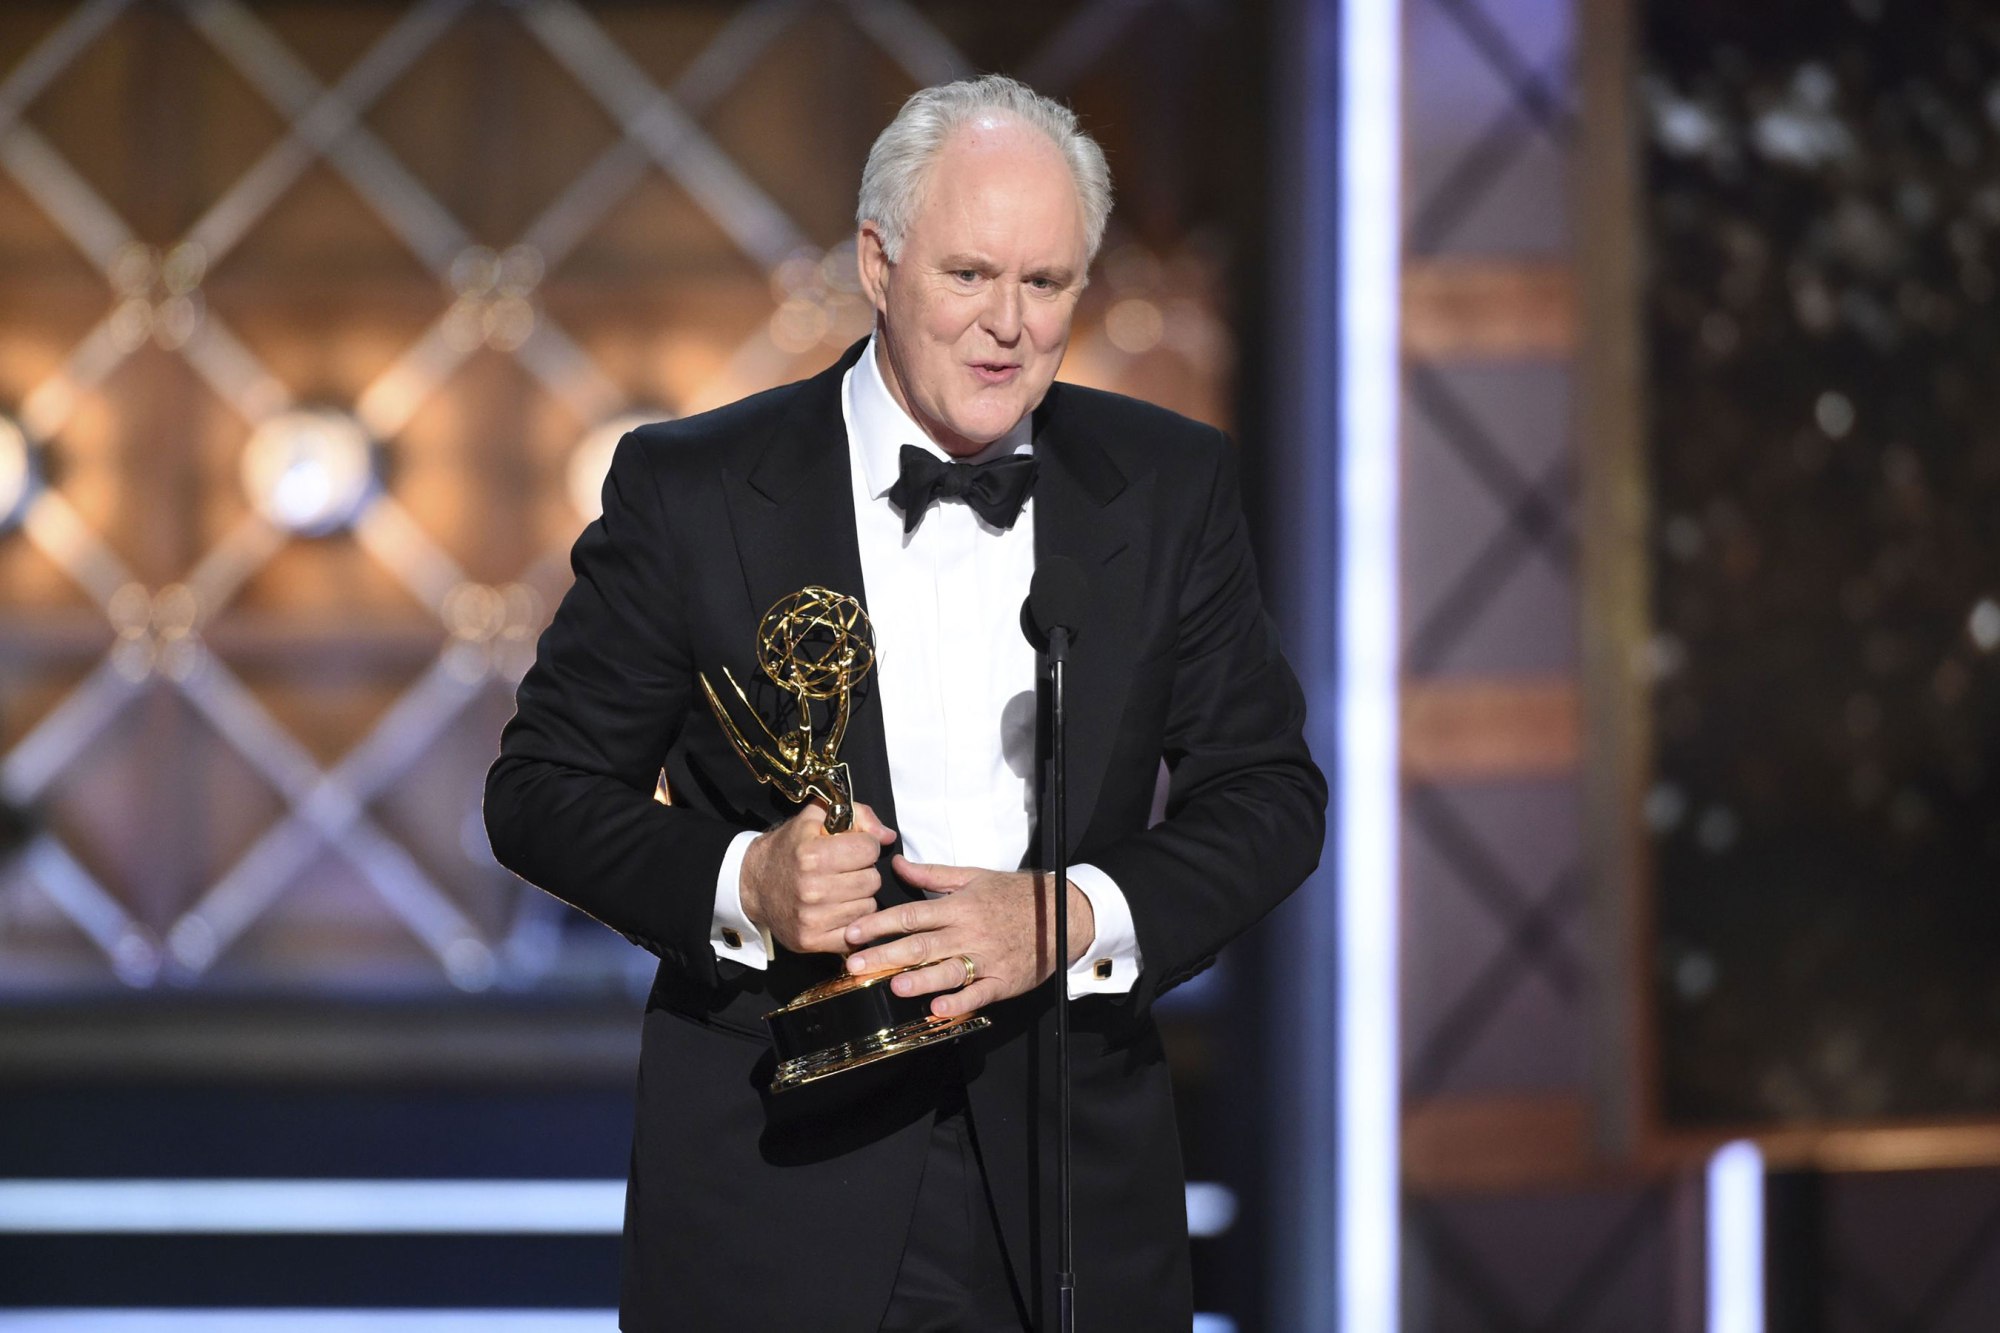 Mandatory Credit: Photo by Invision/AP/REX/Shutterstock (9065785u) John Lithgow accepts the award for outstanding supporting actor in a drama series "The Crown" at the 69th Primetime Emmy Awards, at the Microsoft Theater in Los Angeles 69th Primetime Emmy Awards - Show, Los Angeles, USA - 17 Sep 2017